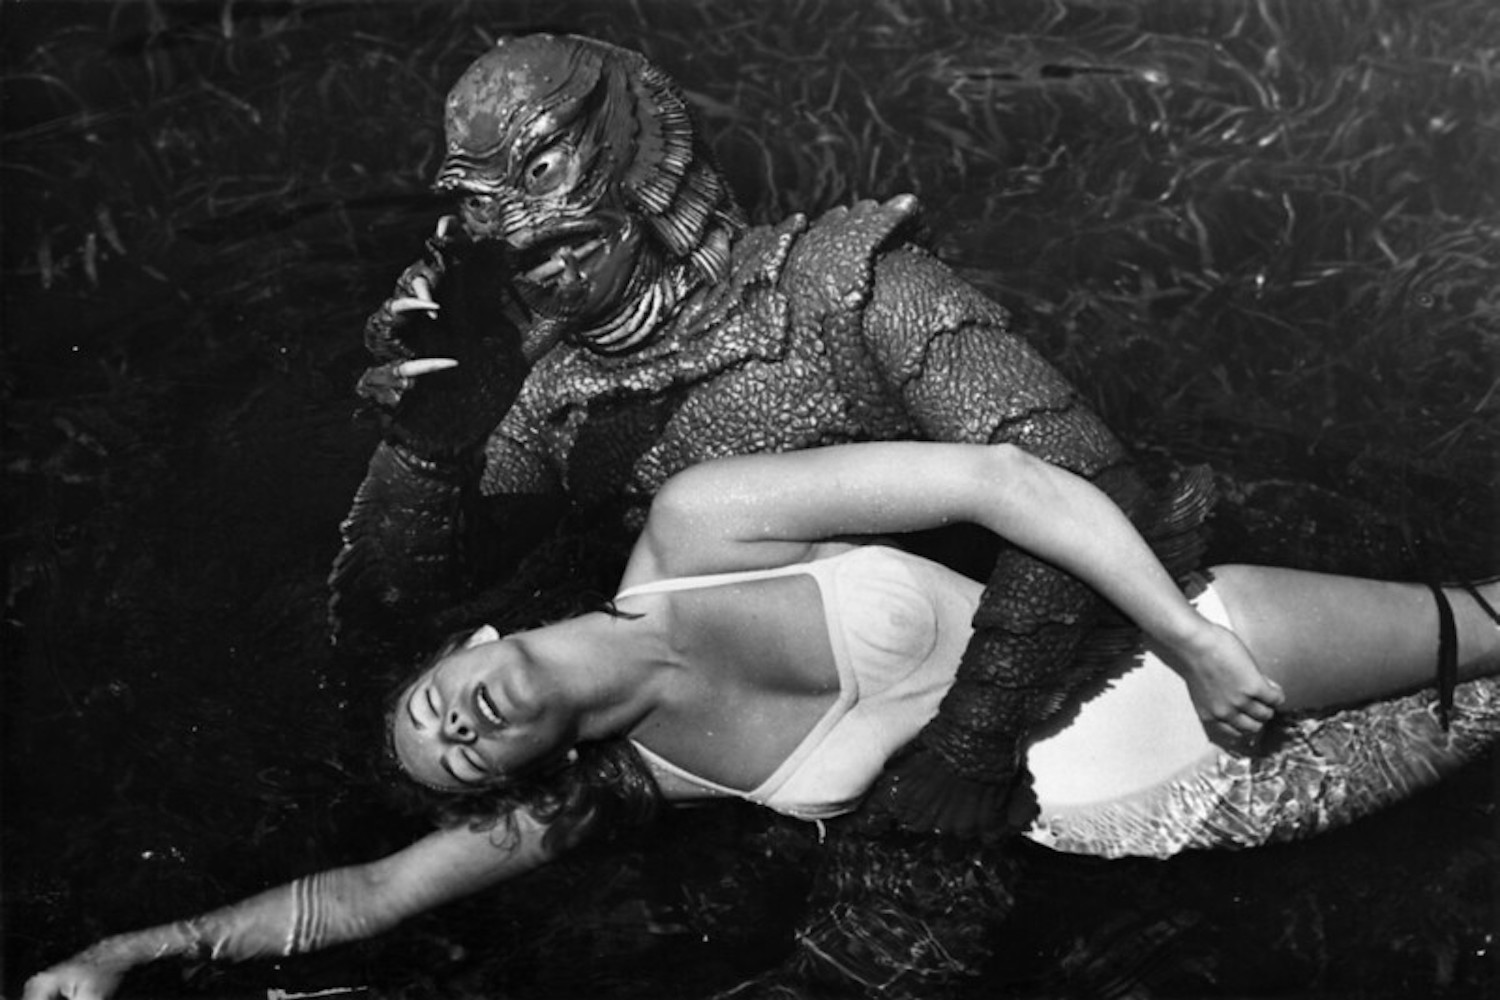 Revenge of the Creature from the Black Lagoon